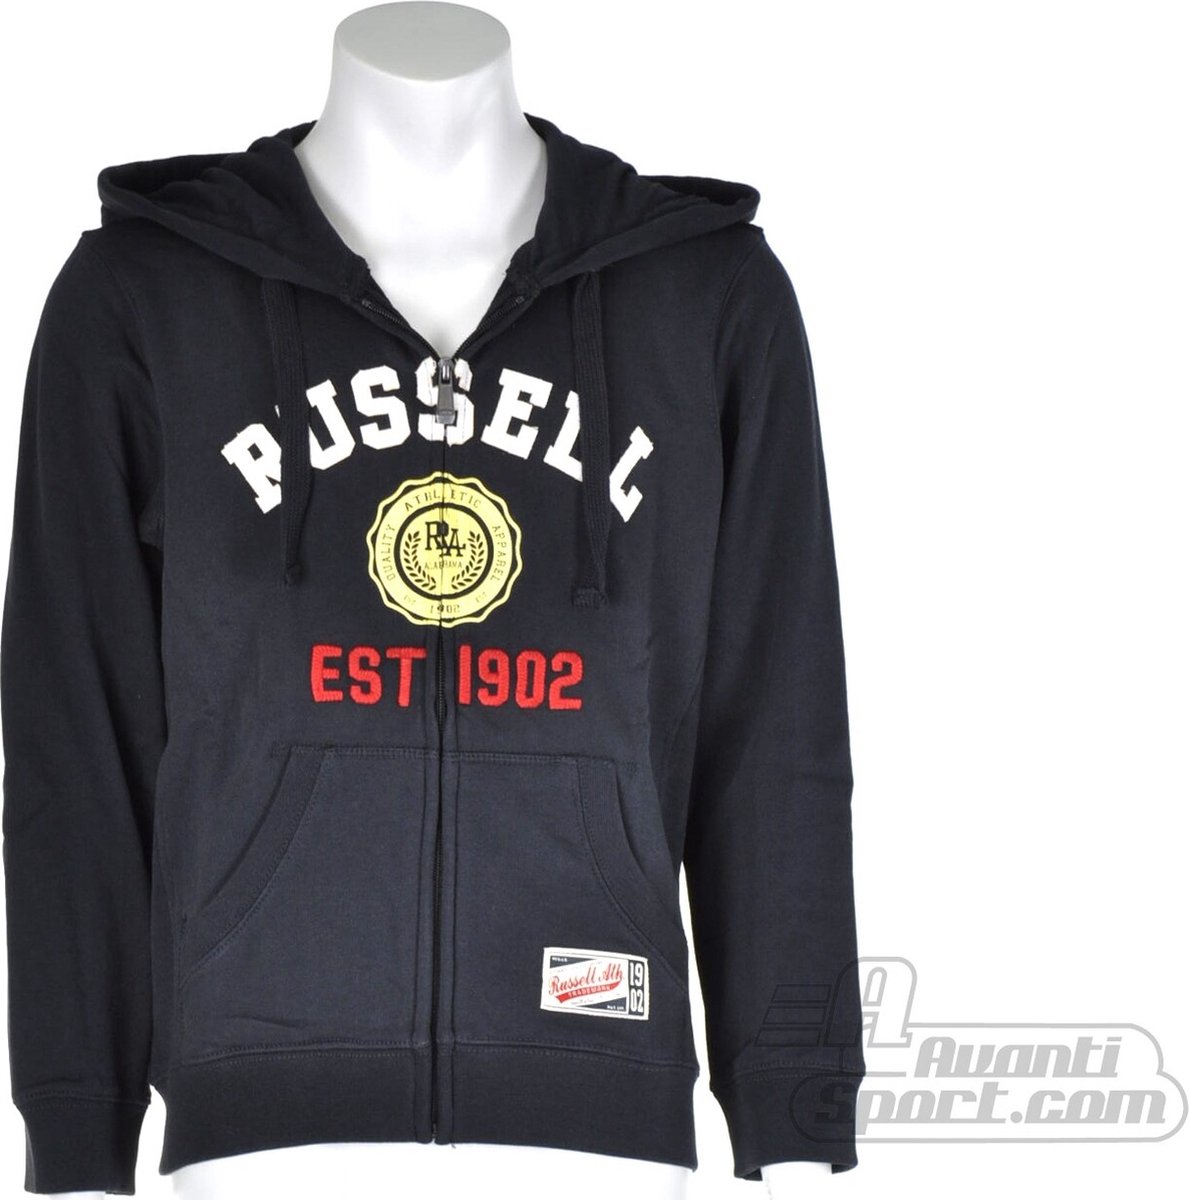 Russell Athletic - Full Zip Hooded Sweater - Kinder Sweater - 128 - DonkerNavy